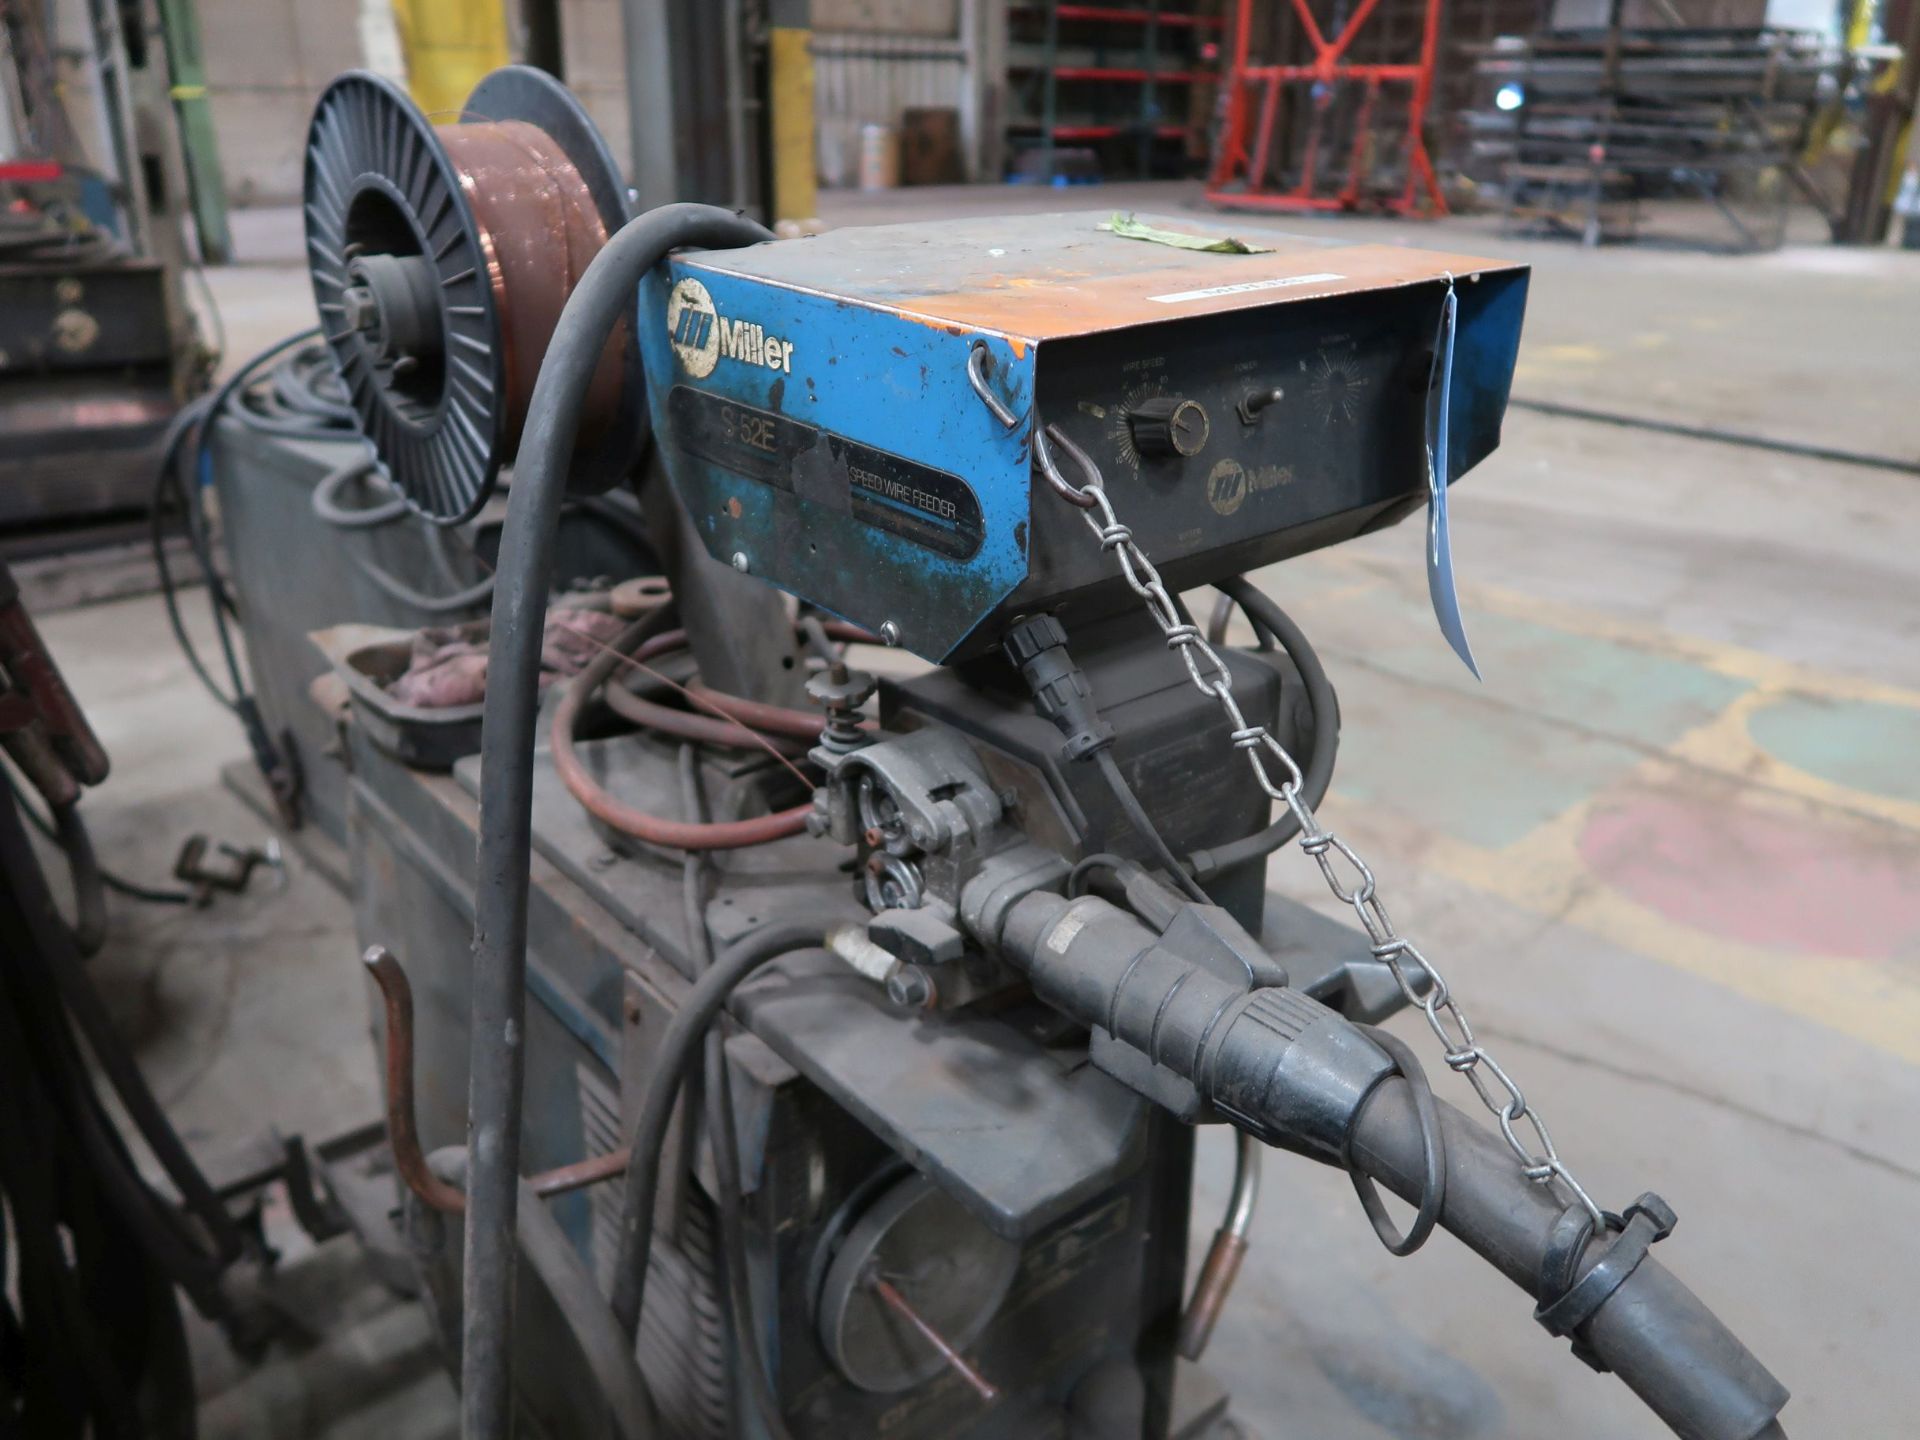 200 AMP MILLER CP-200 WELDER W/ S-52E WIRE FEED - Image 2 of 4